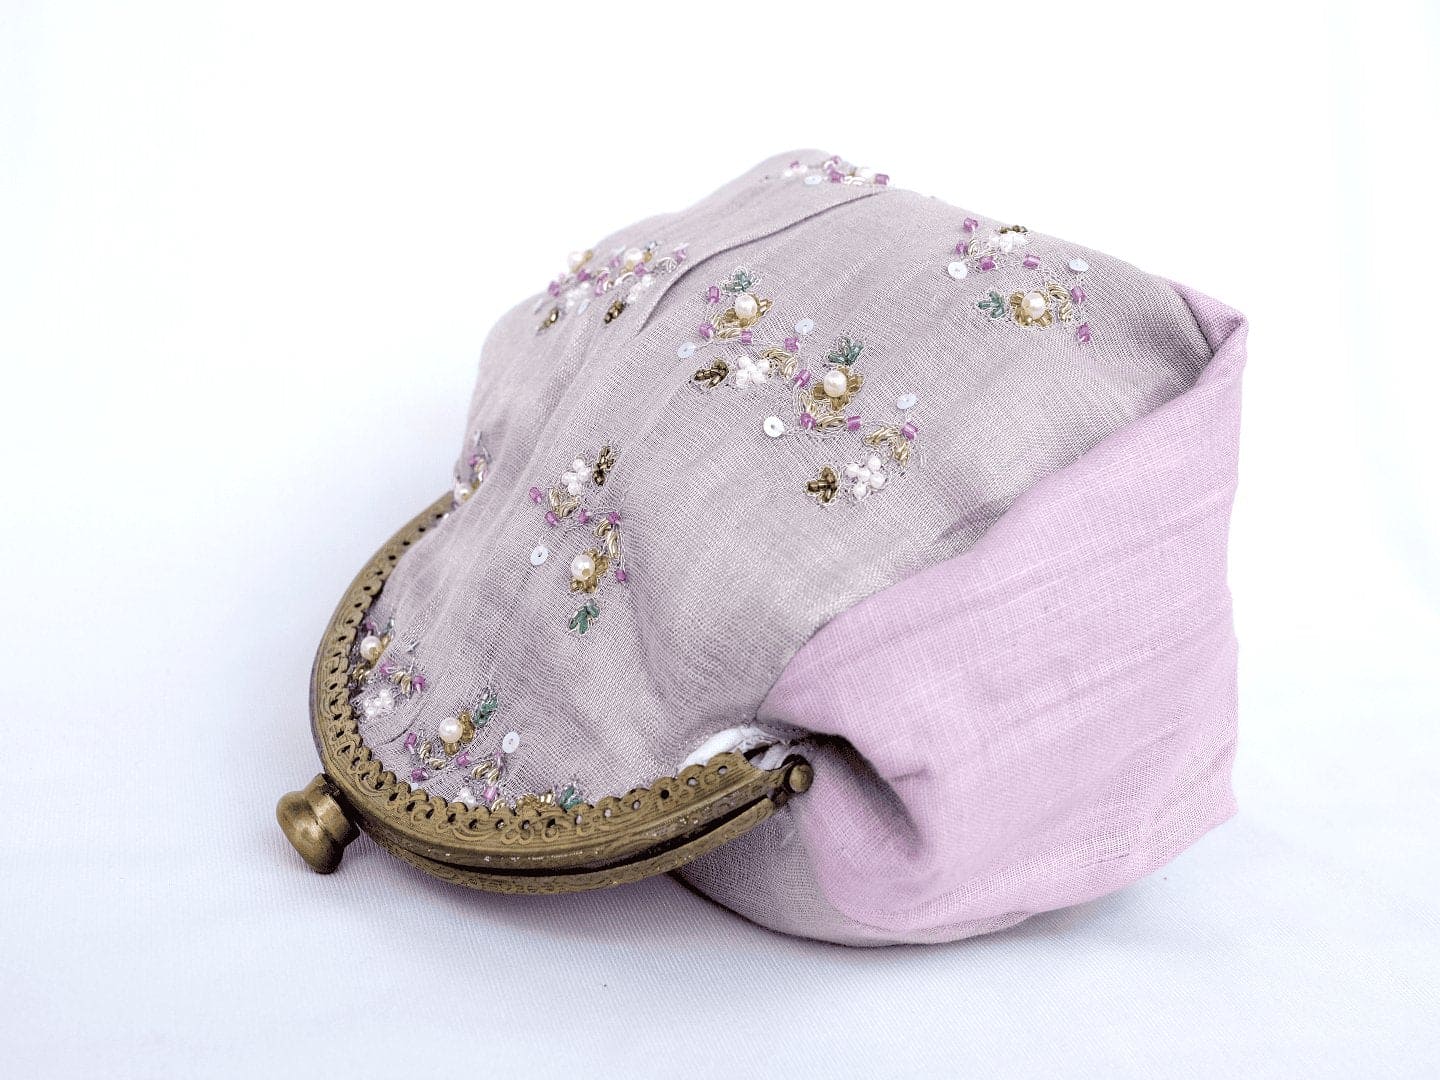 Hand Embroidered Lavender Clutch - Charkha TalesHand Embroidered Lavender Clutch